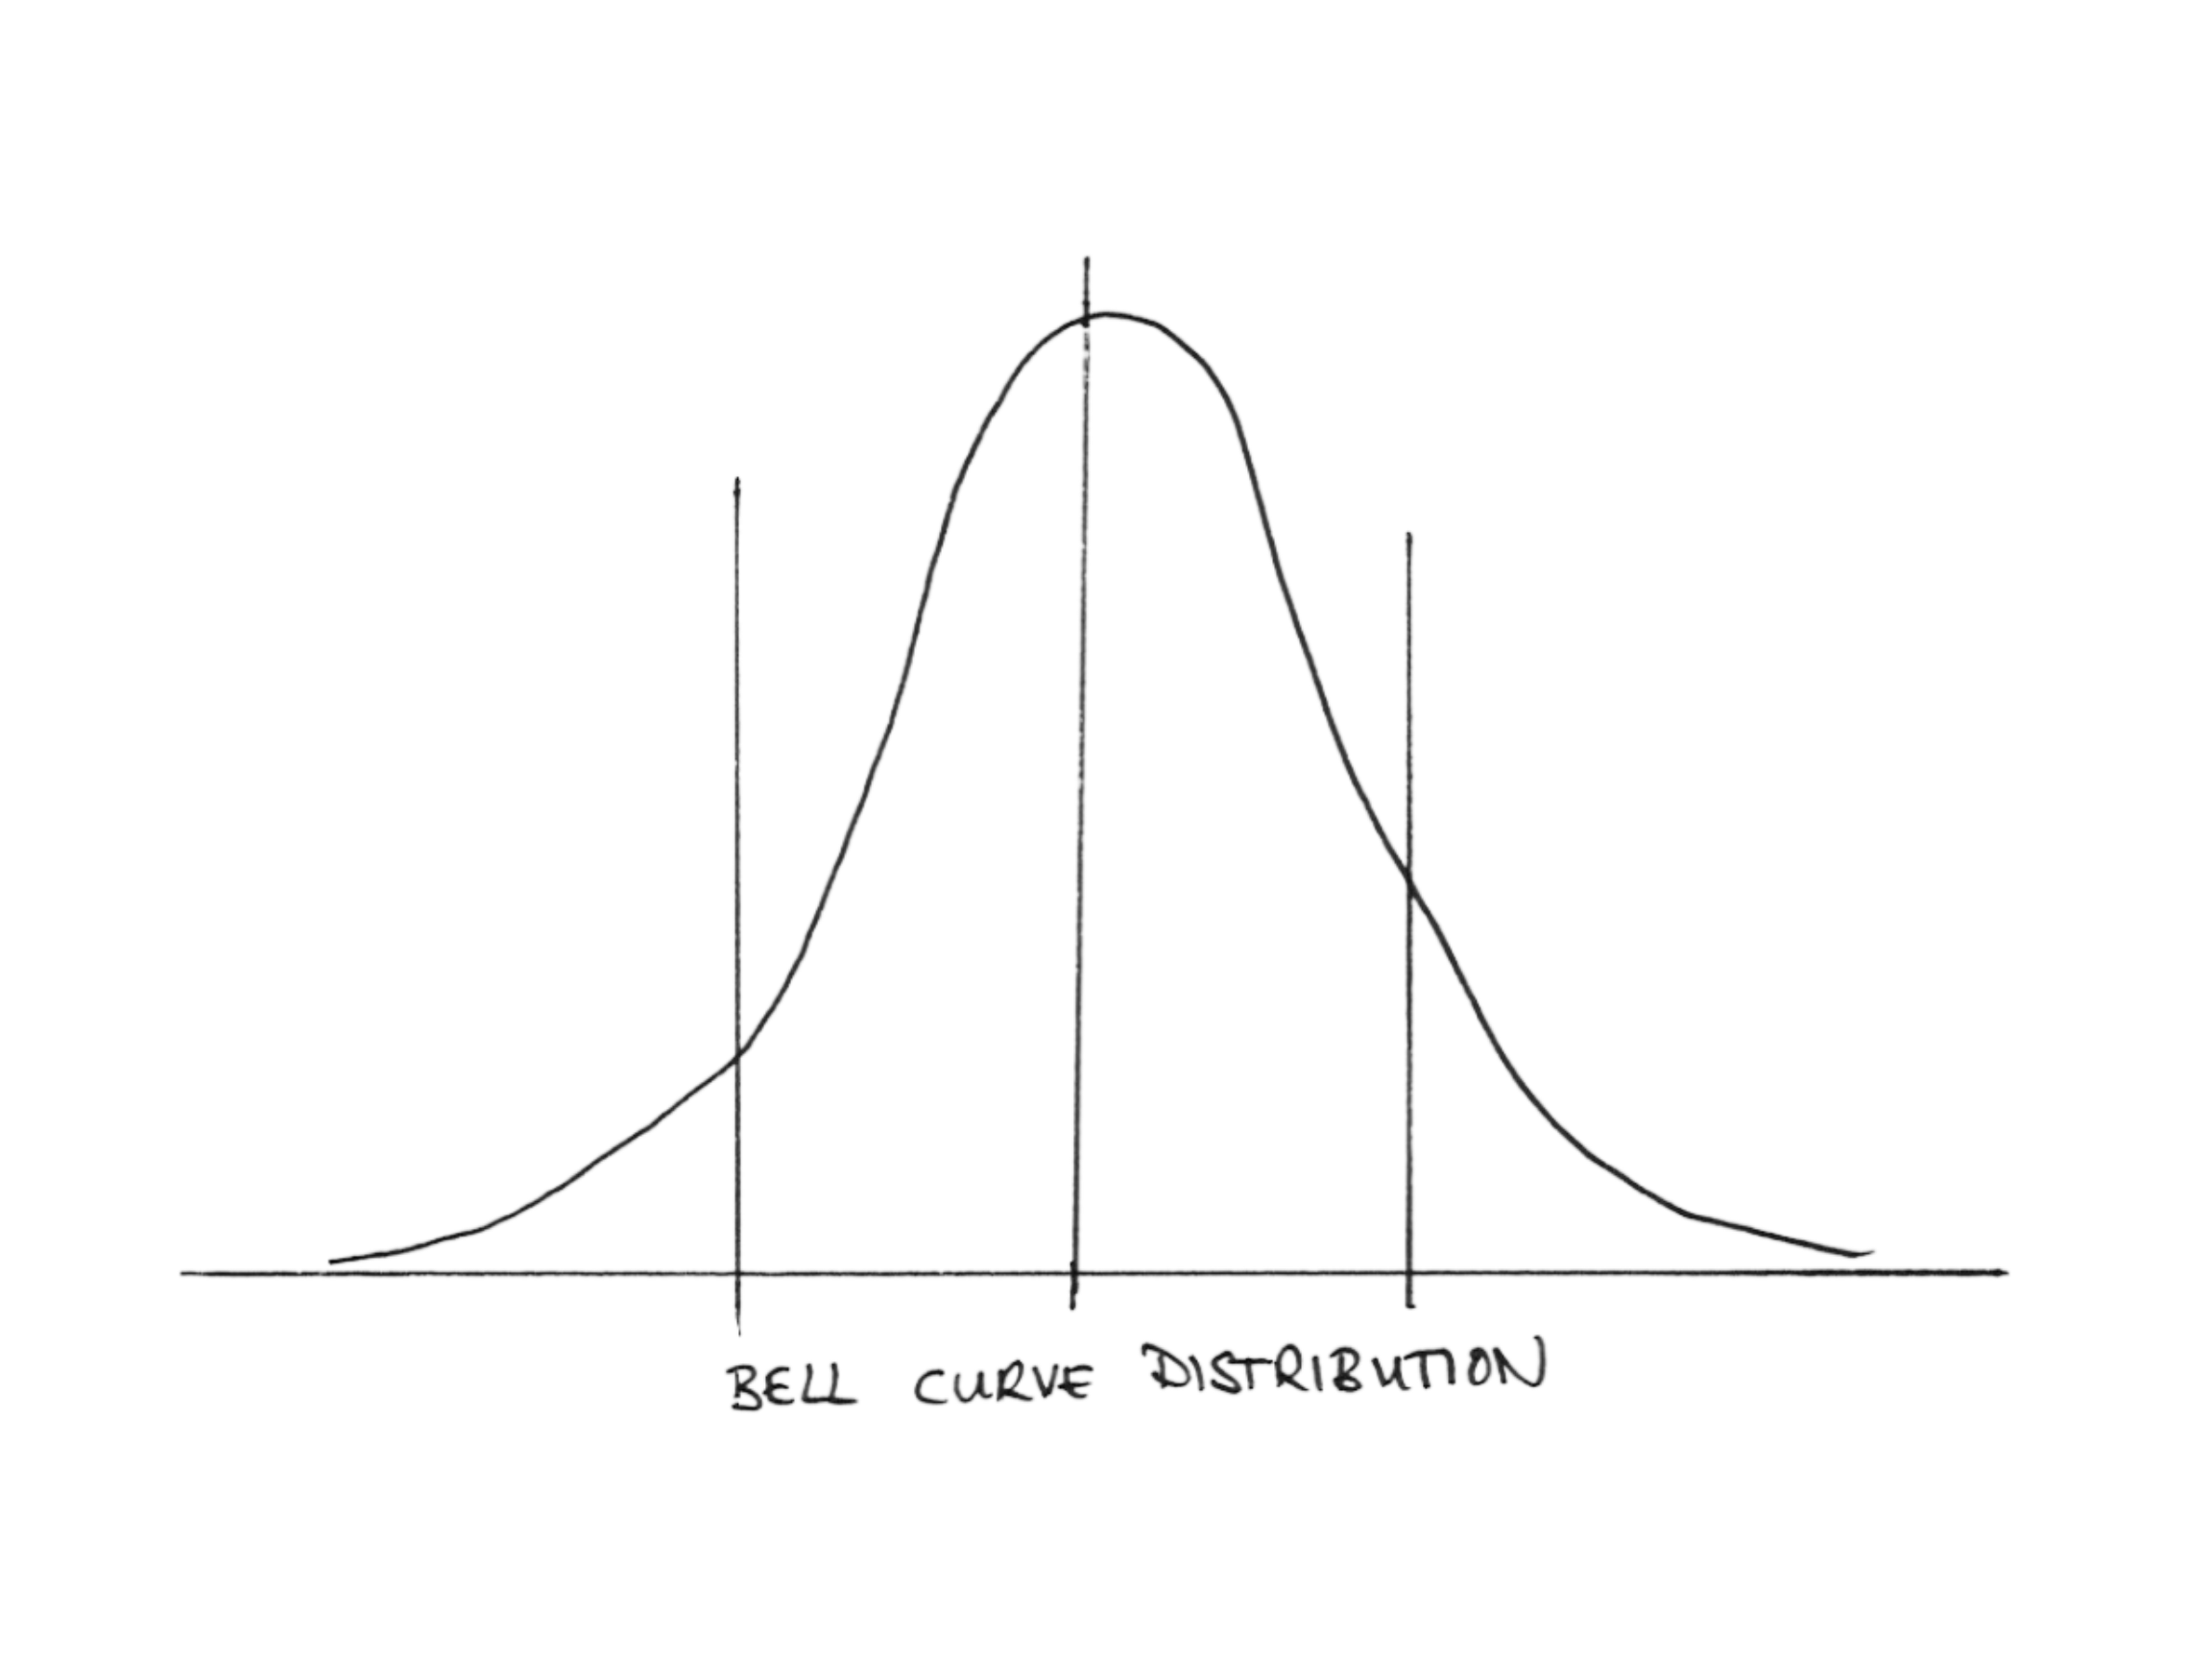 A blank hand drawn bell curve. The text reads "bell curve distribution". The graphic is a line drawing of a graph with a line across the horizontal plane that is shaped somewhat like a bell with the peak at dead center. There is a vertical line at the very middle of the curve (and the highest point) and there are two lines evenly distributed either side. 